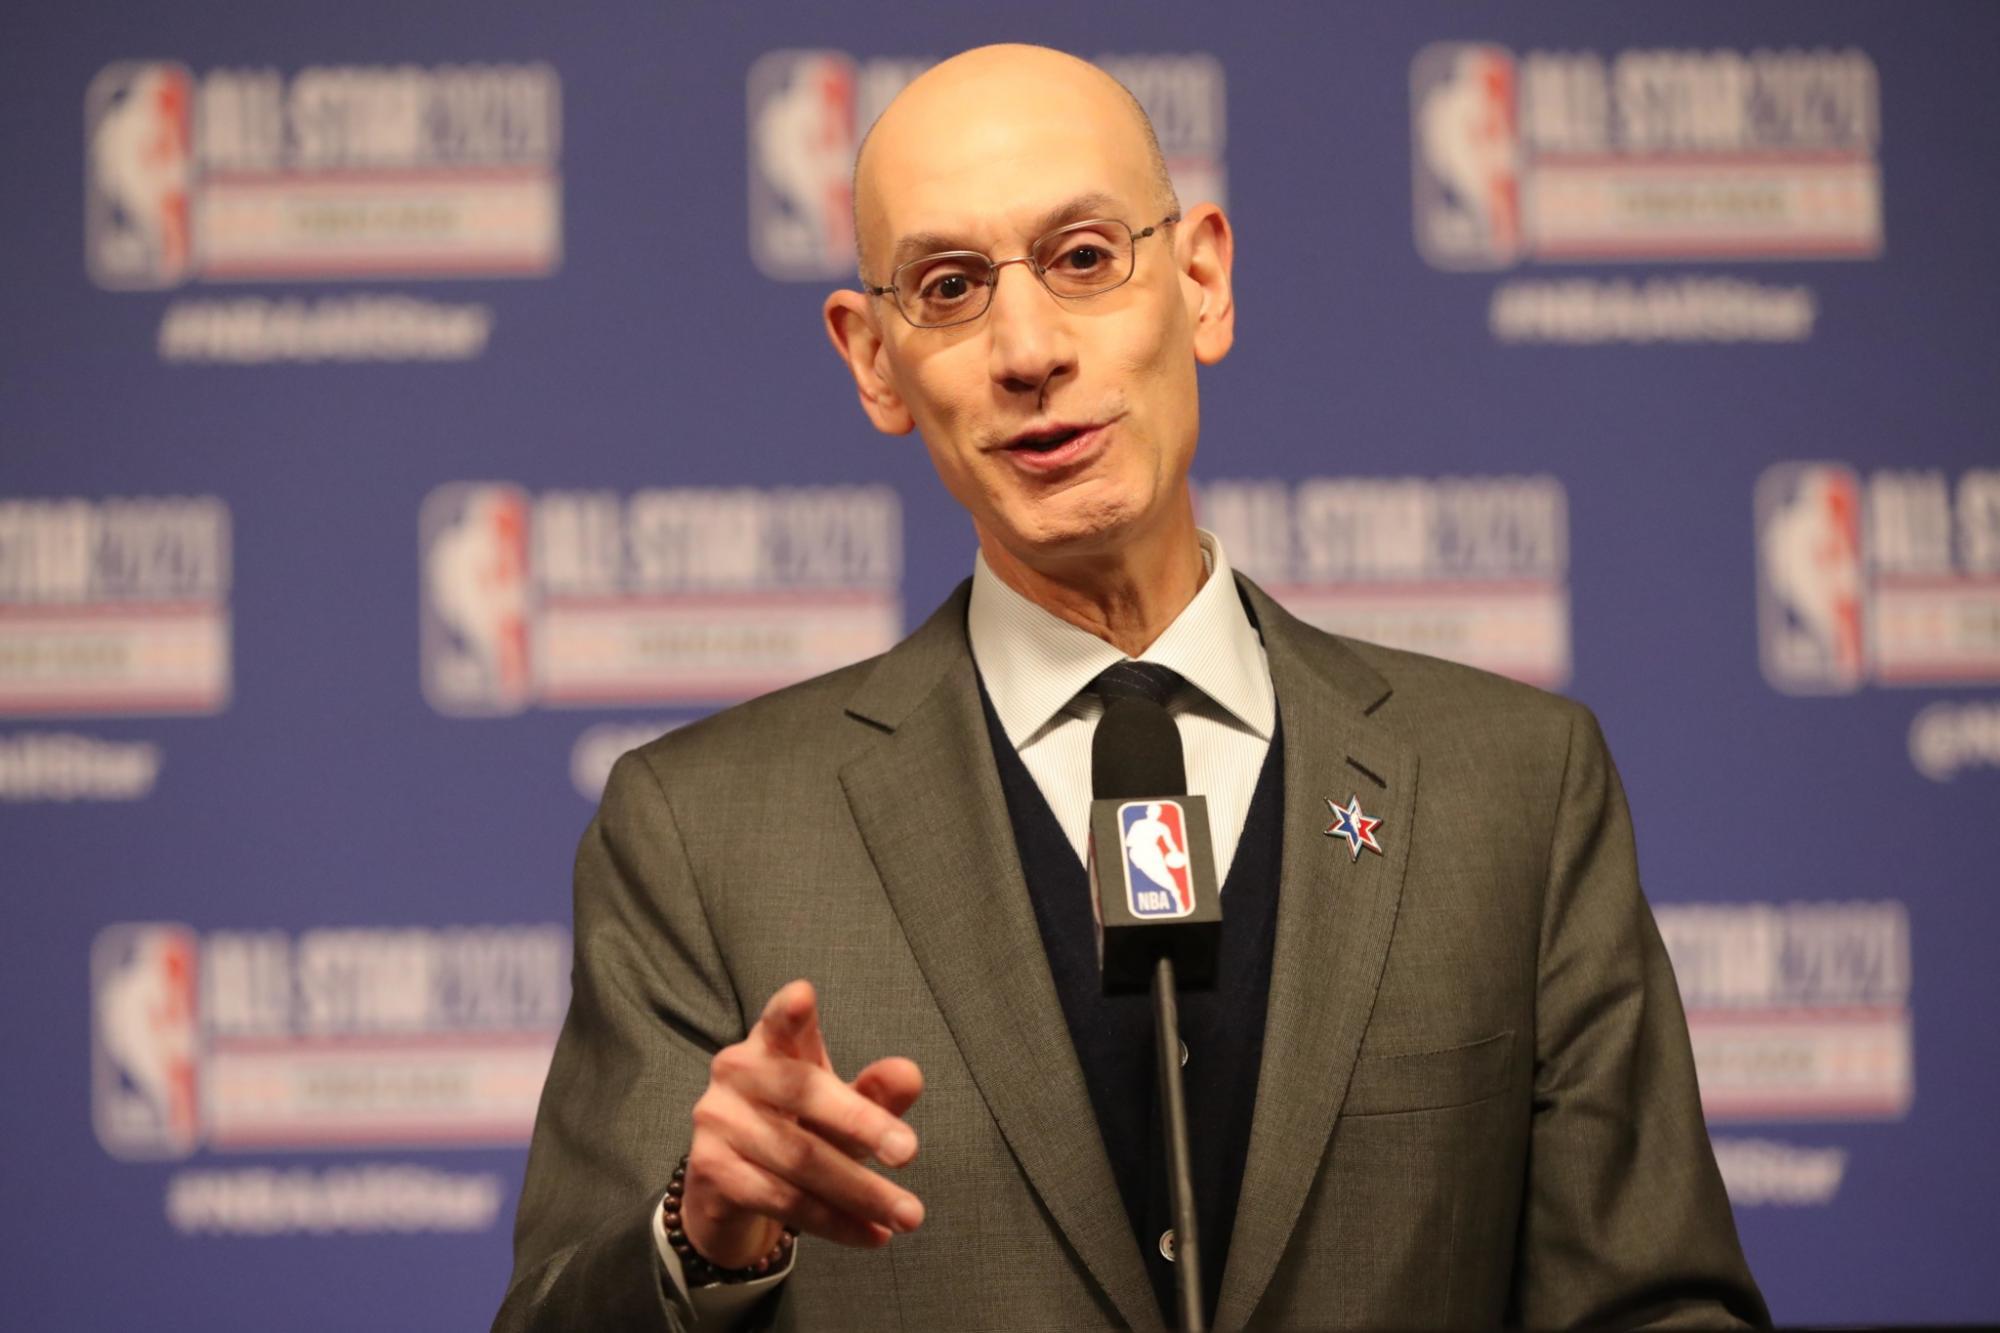 FEB 15, 2020; CHICAGO, ILLINOIS, USA; NBA COMMISSIONER ADAM SILVER SPEAKS AT A PRESS CONFERENCE DURING NBA ALL STAR SATURDAY NIGHT AT UNITED CENTER. MANDATORY CREDIT: DENNIS WIERZBICKI-USA TODAY SPORTS BY EDDIE MORAN